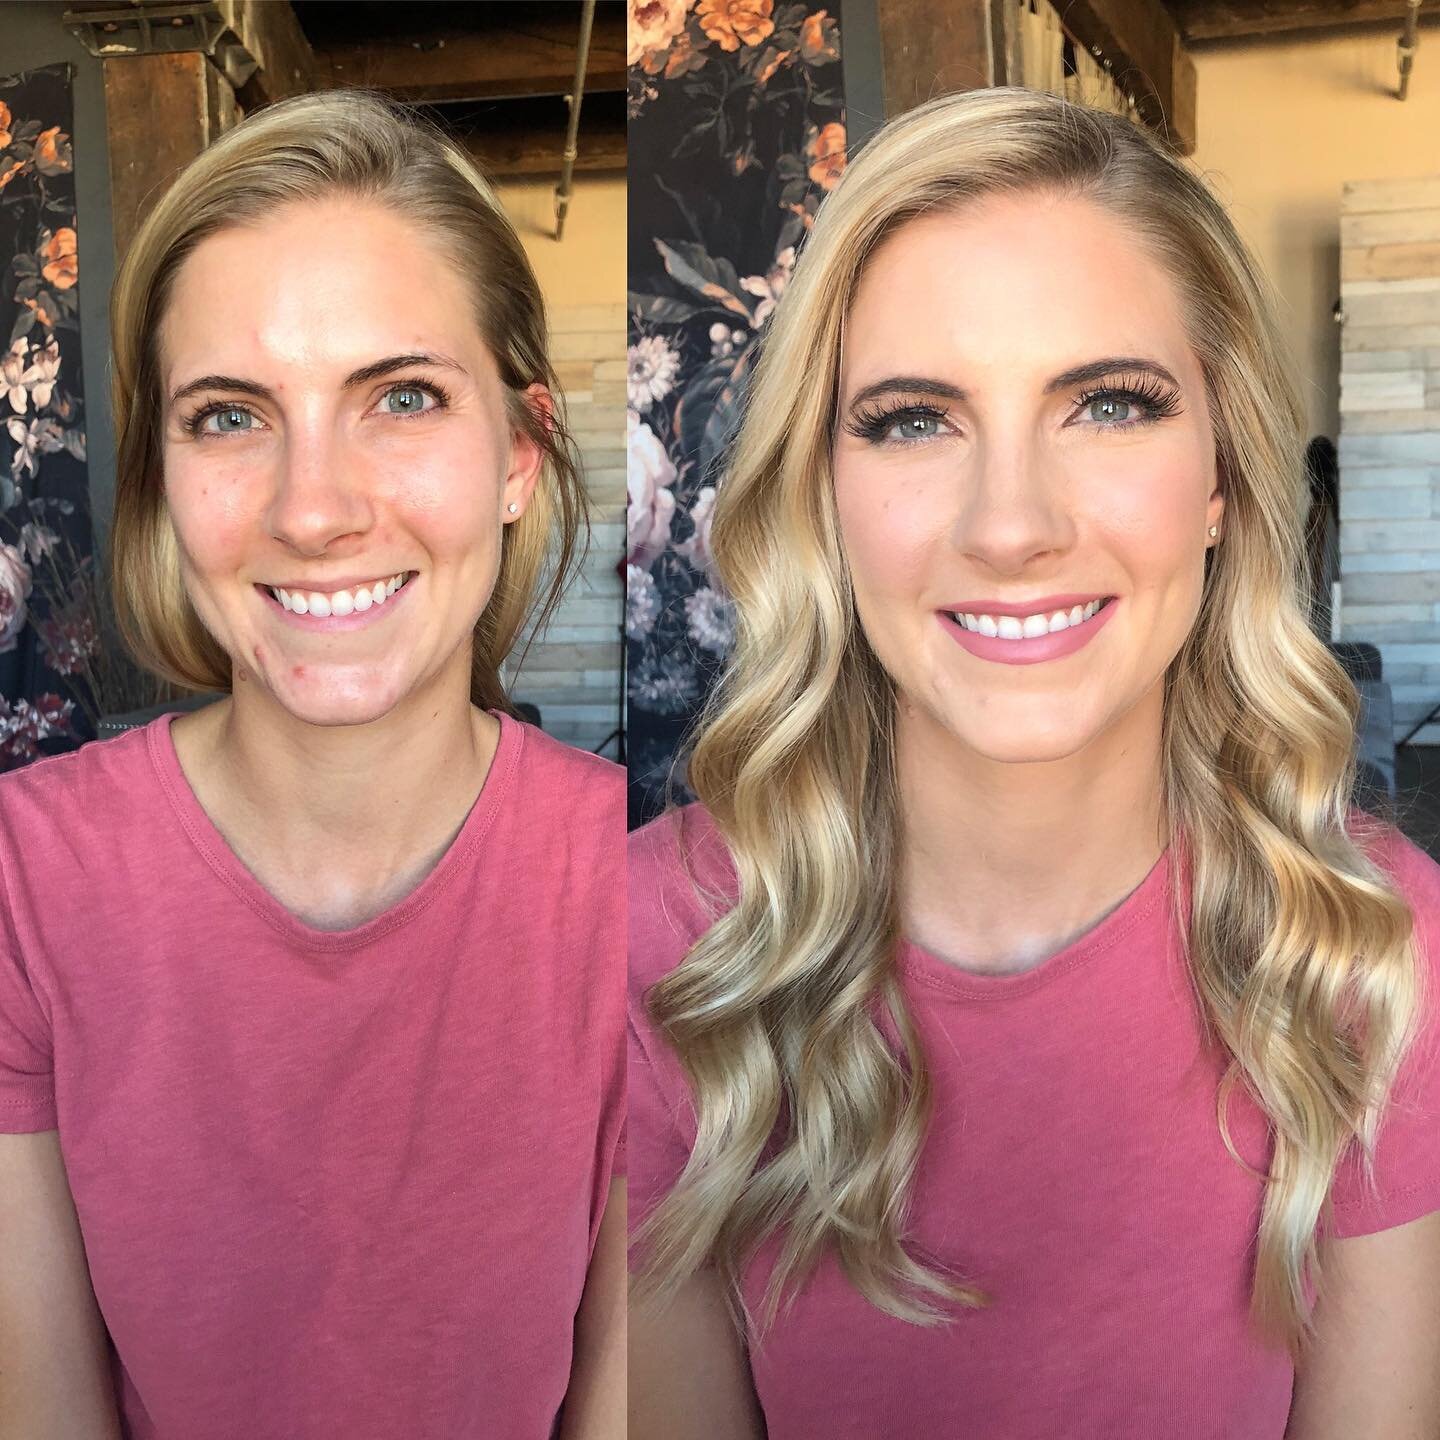 Gorgeous Before &amp; After!

Hair &amp; Makeip Application 💋

For Inquiries-
HTTPS://www.makeupbycaitlin.com

https://www.facebook.com/makeupbycaitlinspah/

Instagram : @caitlinguillien_mua 

PRODUCTS USED
PUR 4 in 1 powder, visionary palette, and 